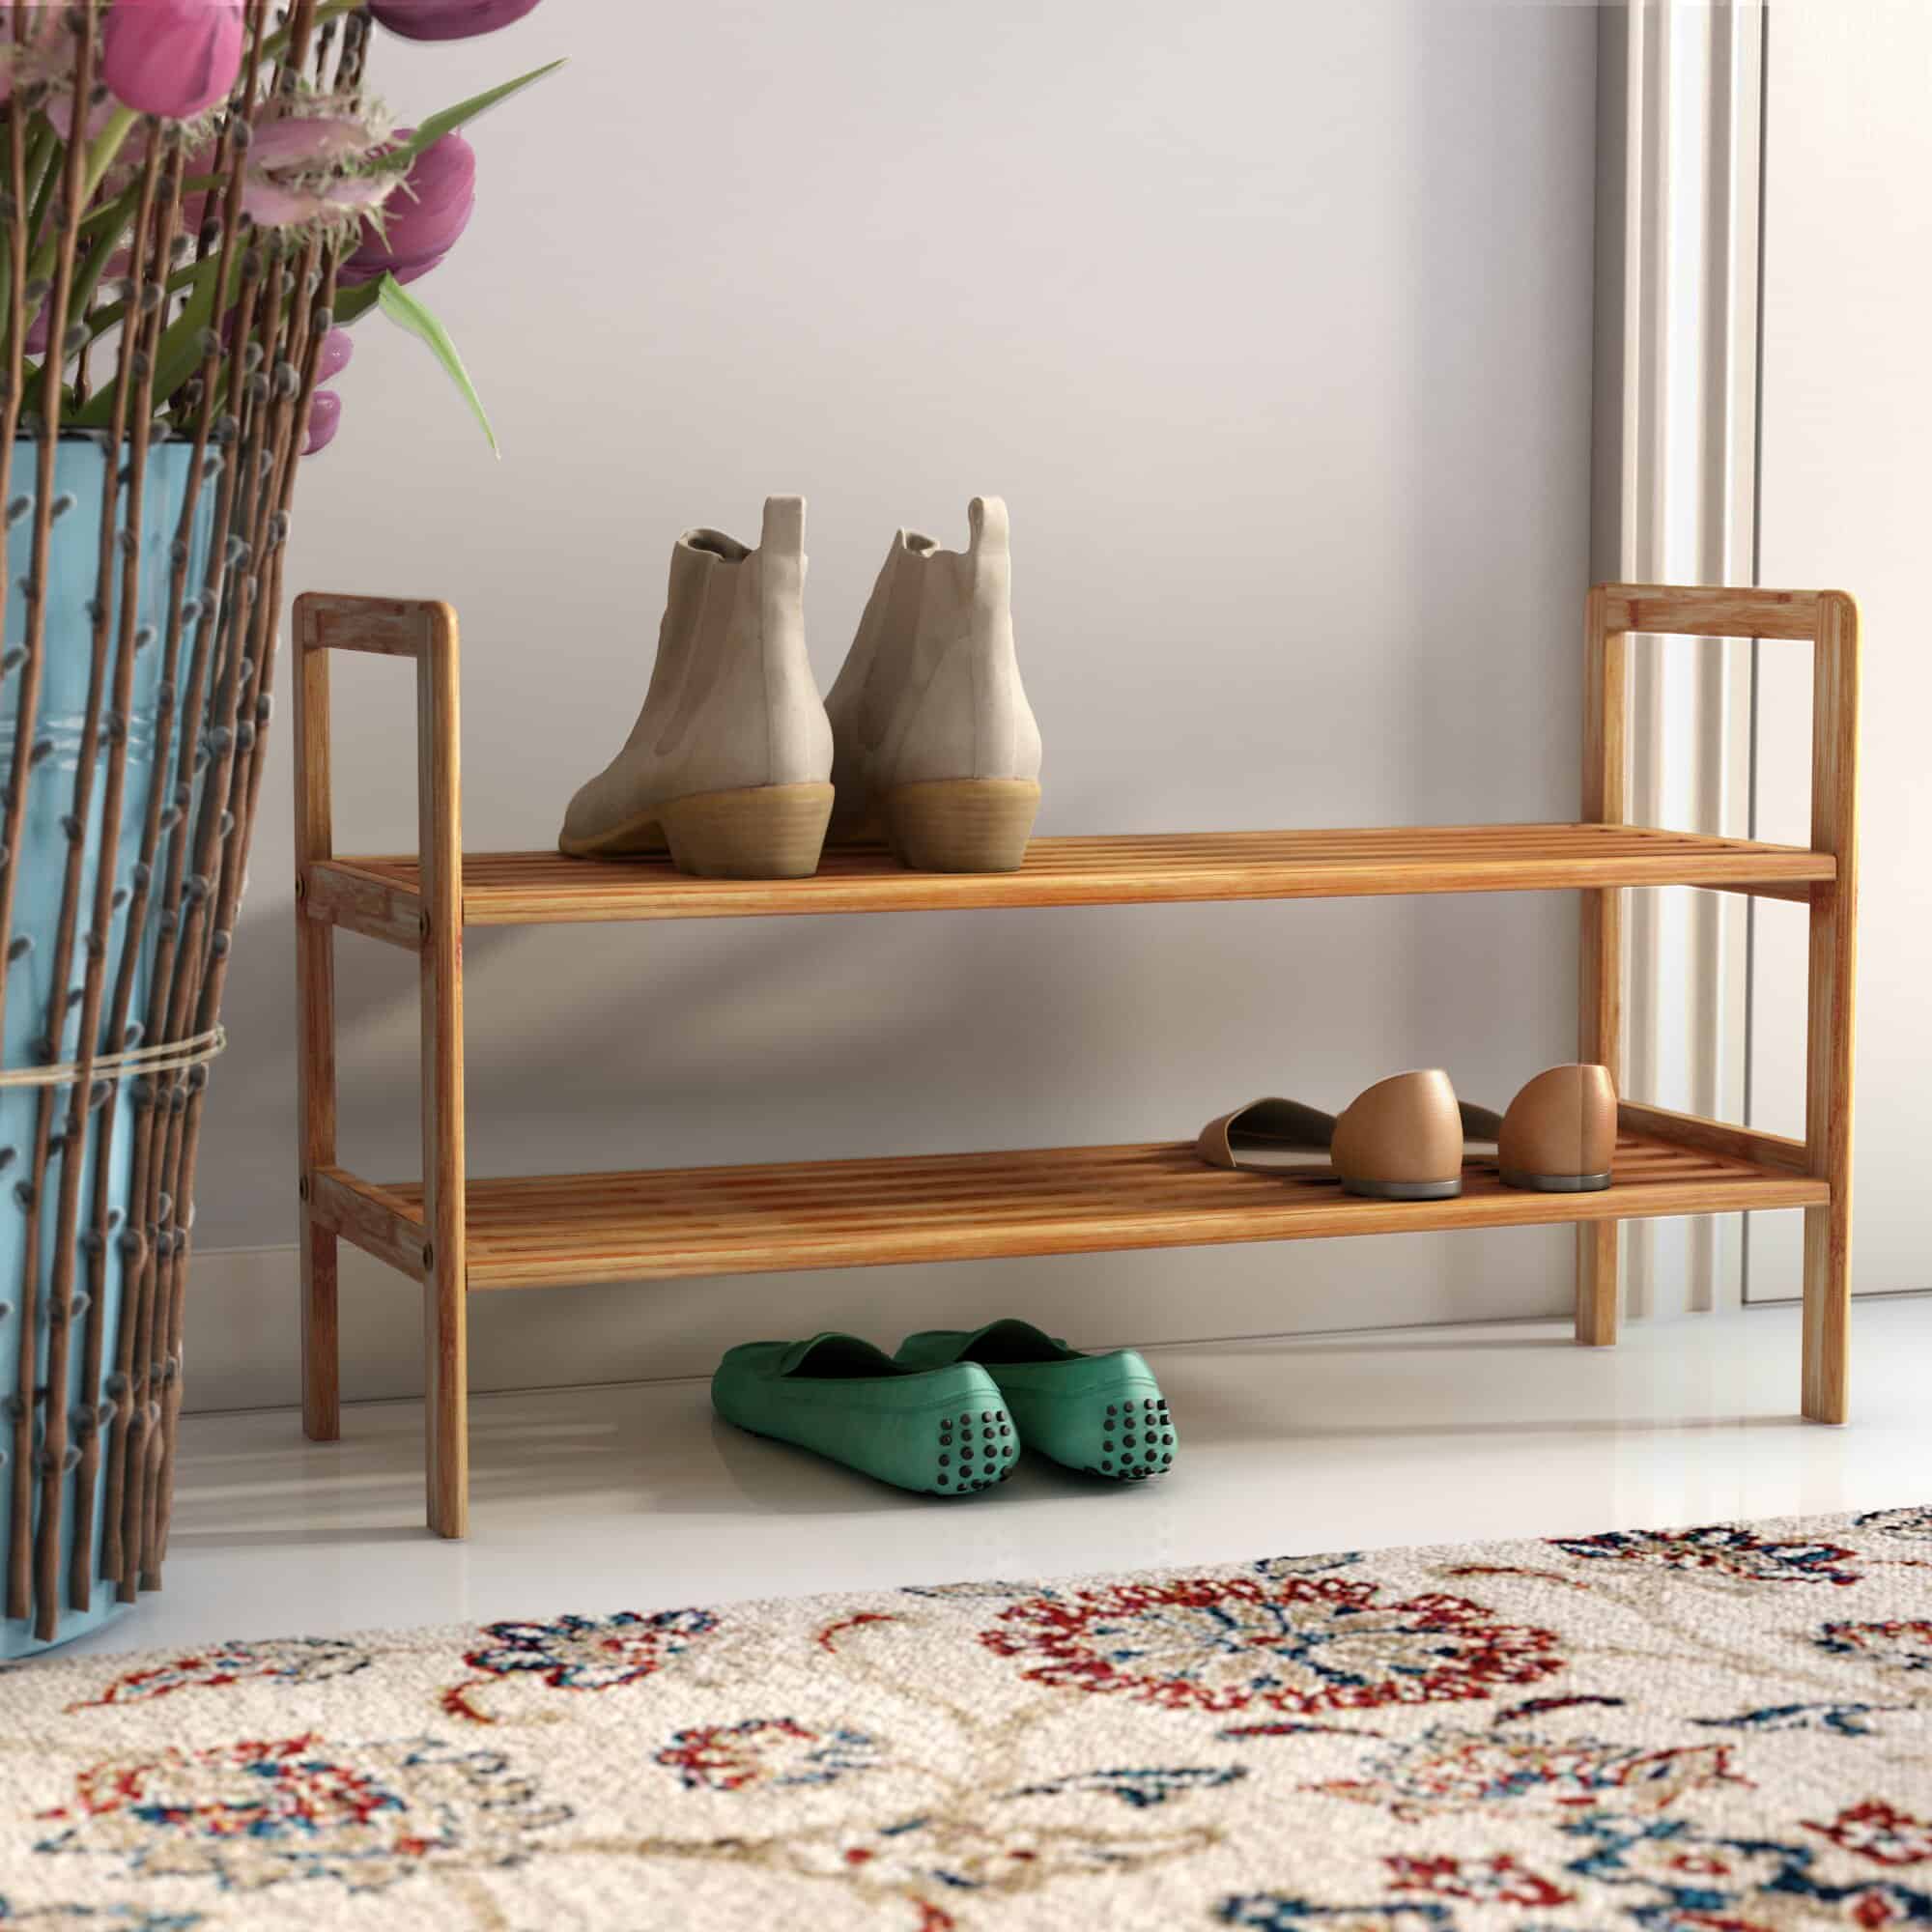 Opt-In for a Simple but Elegant Bamboo Shoe Rack